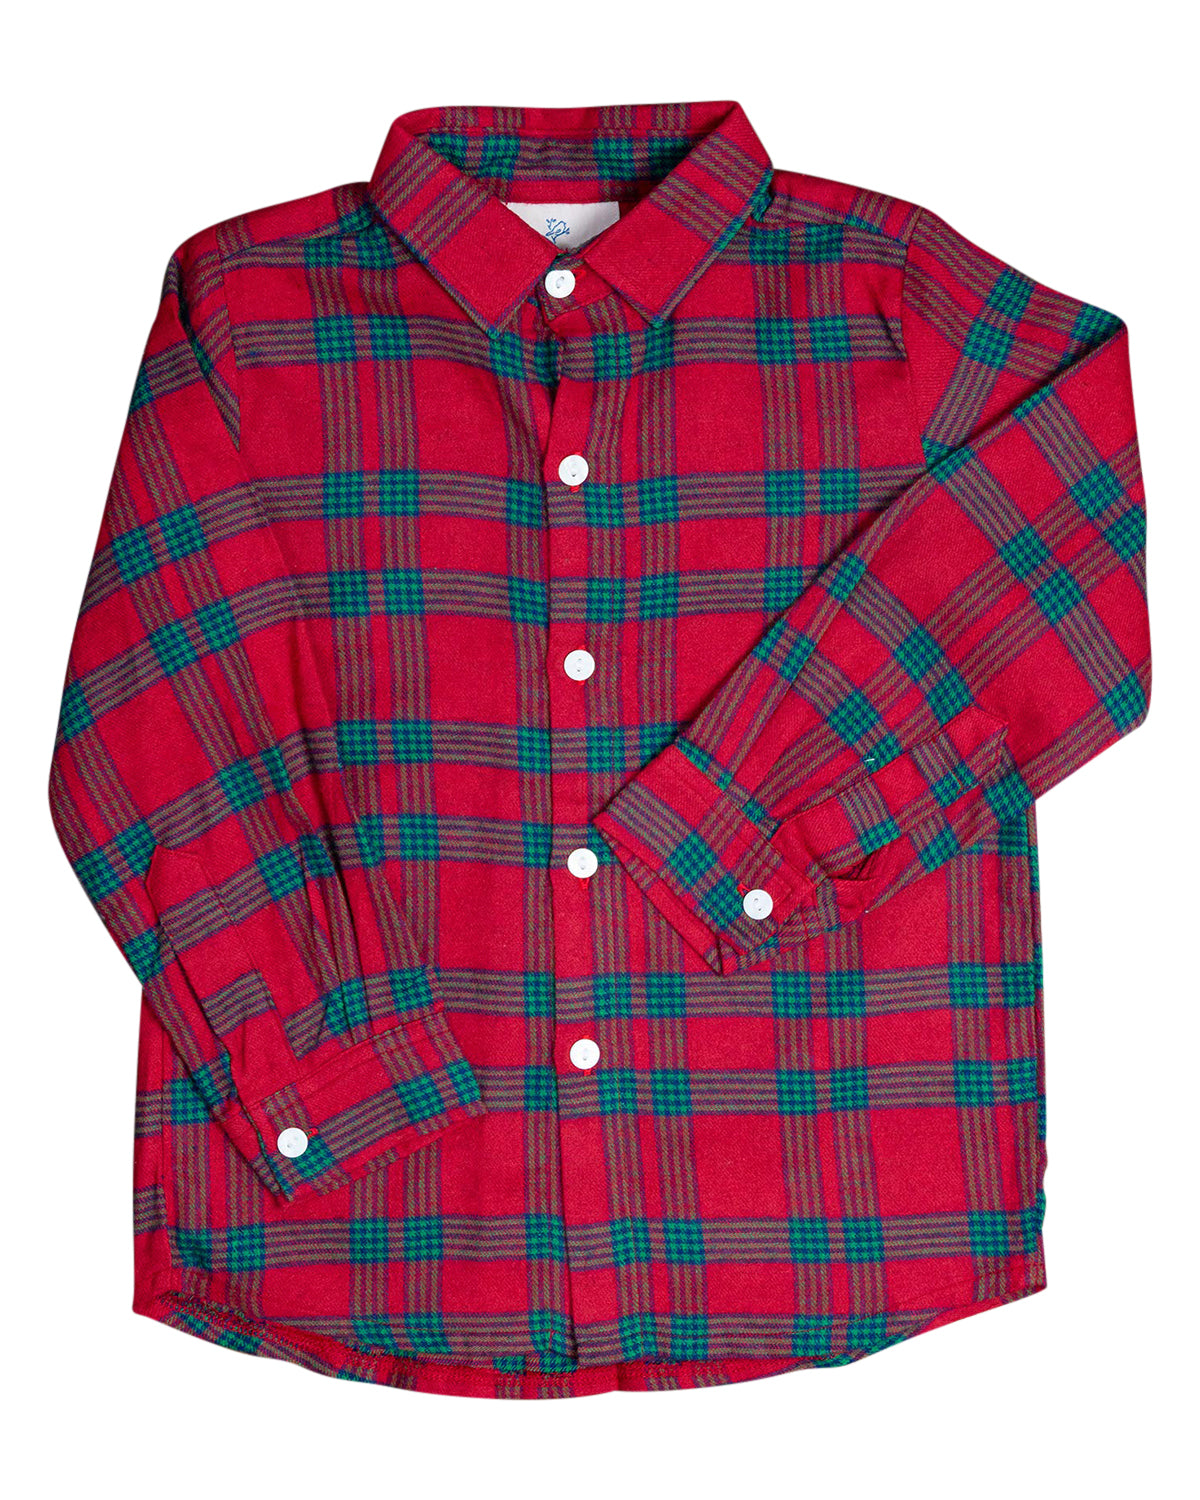 Red and Green Plaid Collared Shirt-FINAL SALE